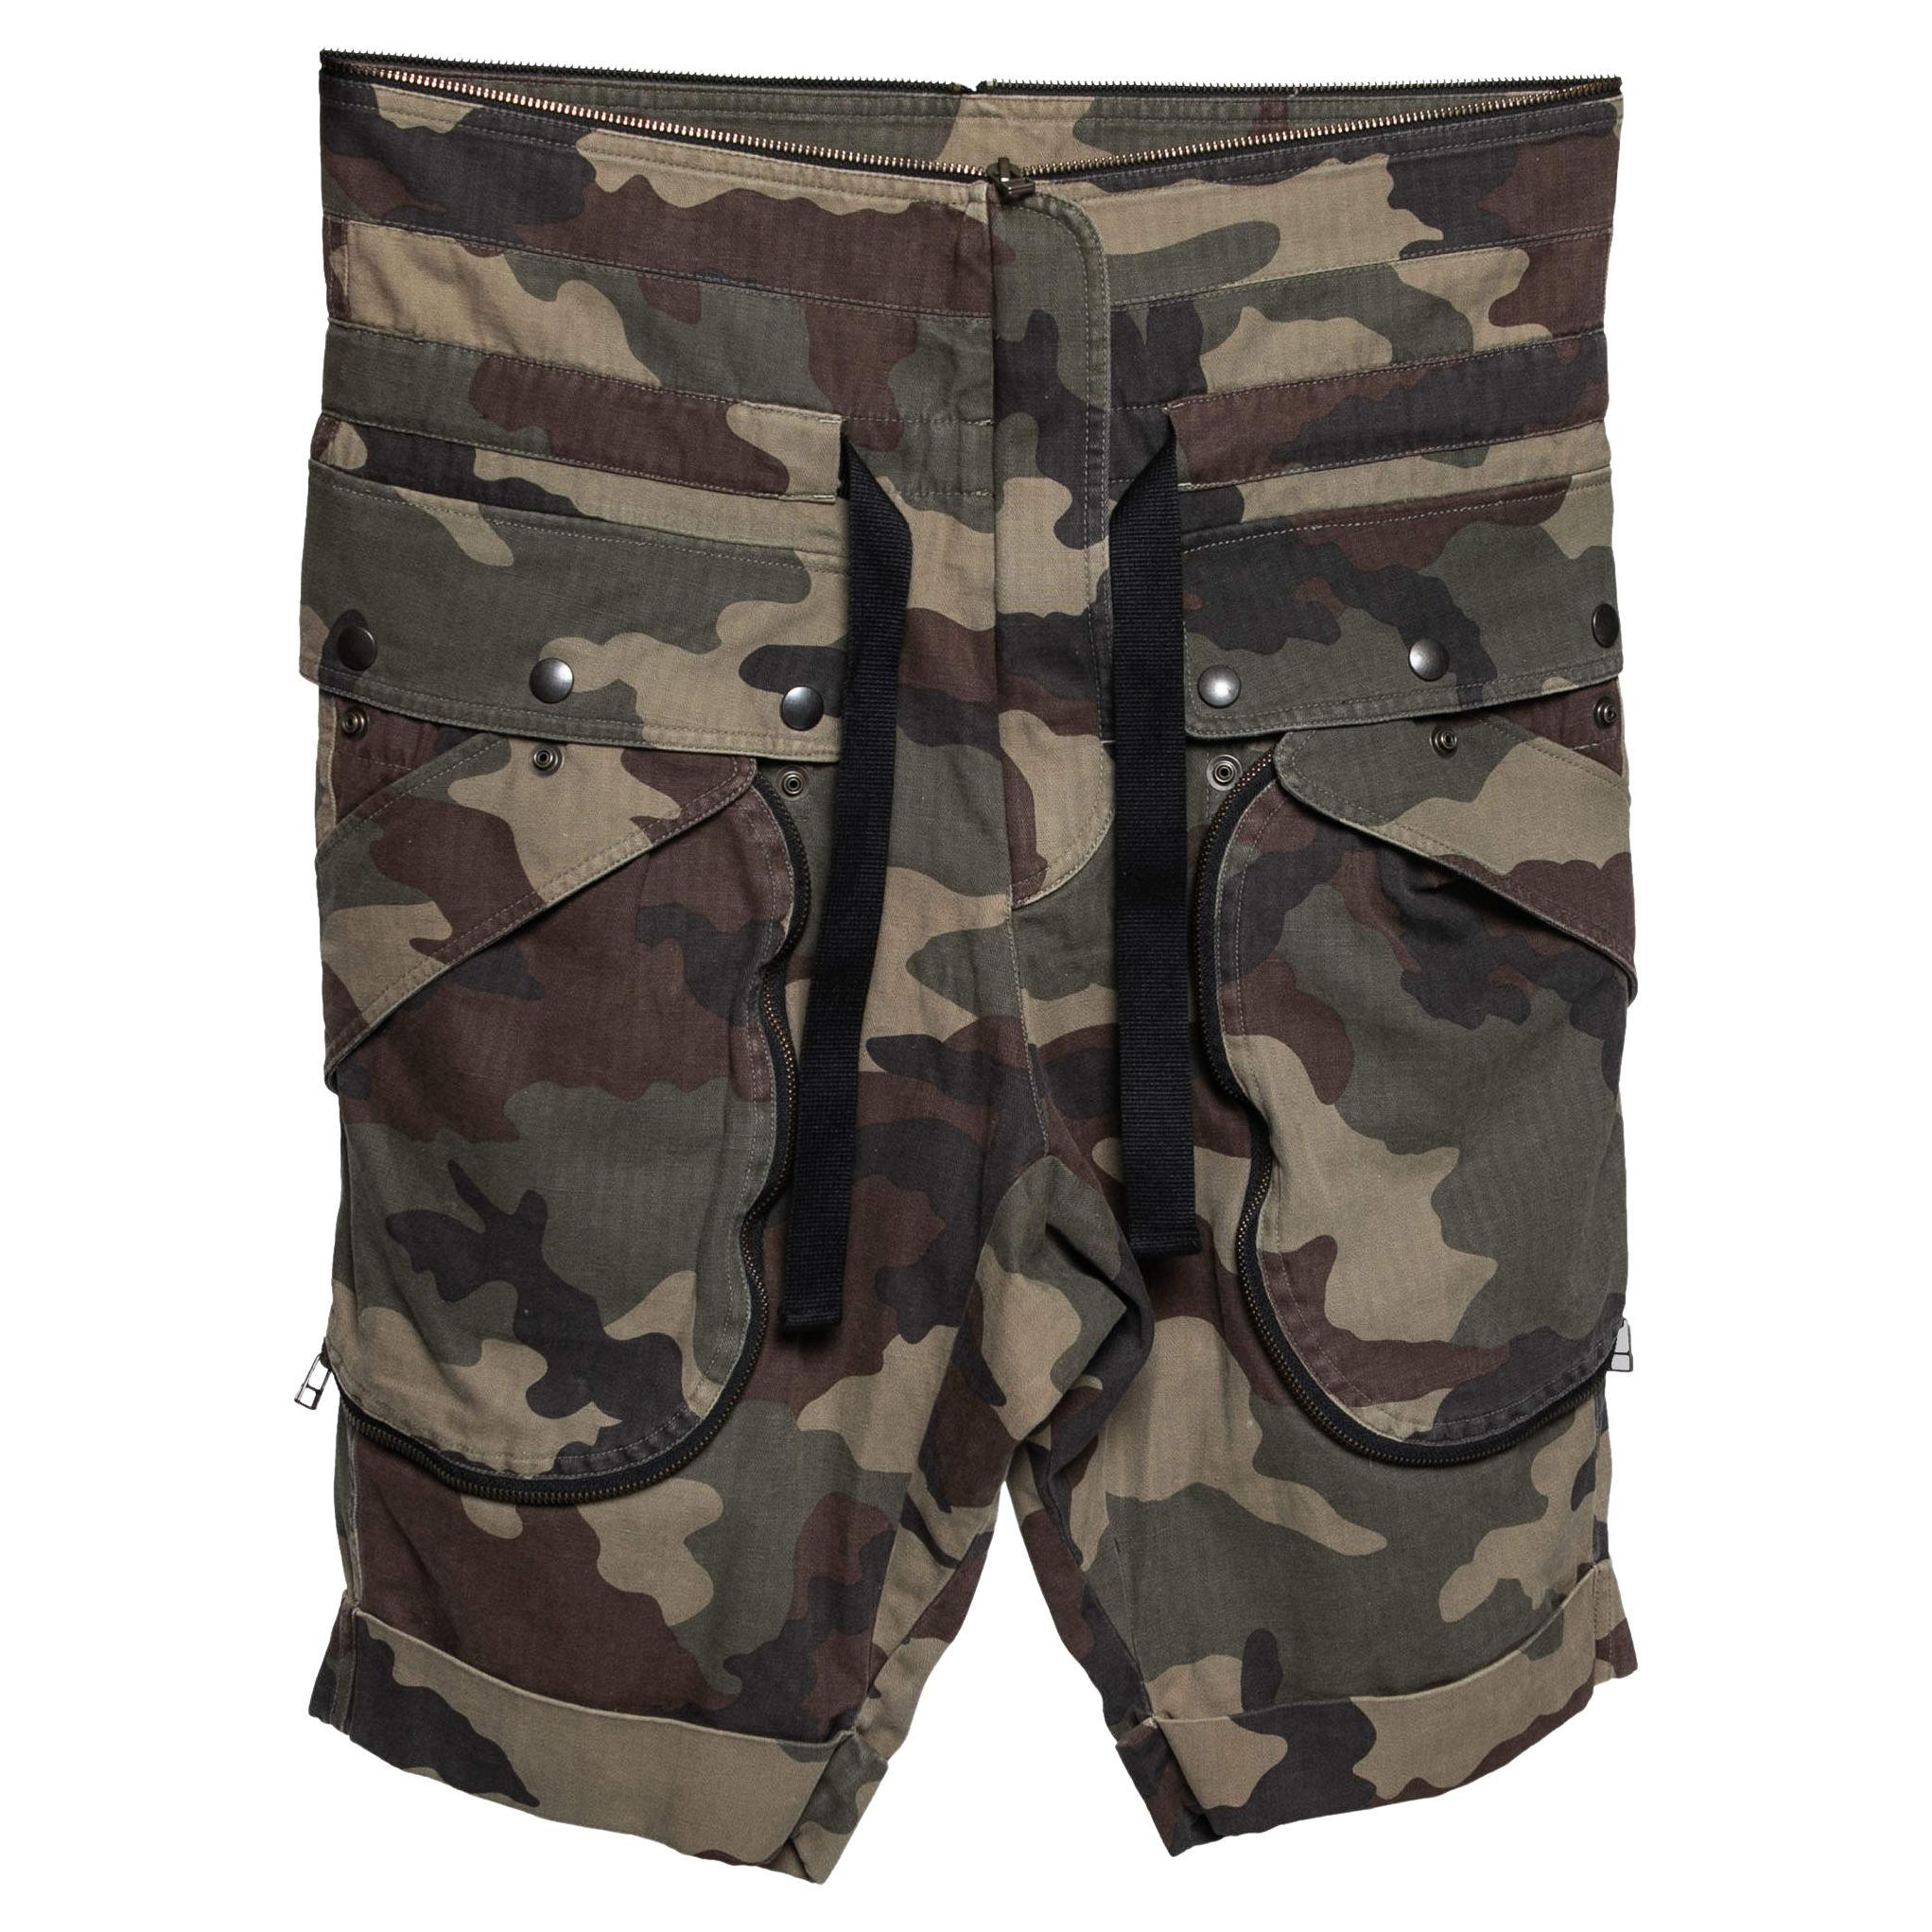 Faith Connexion Camouflage Printed Cotton Rolled Up Cuffs Shorts S